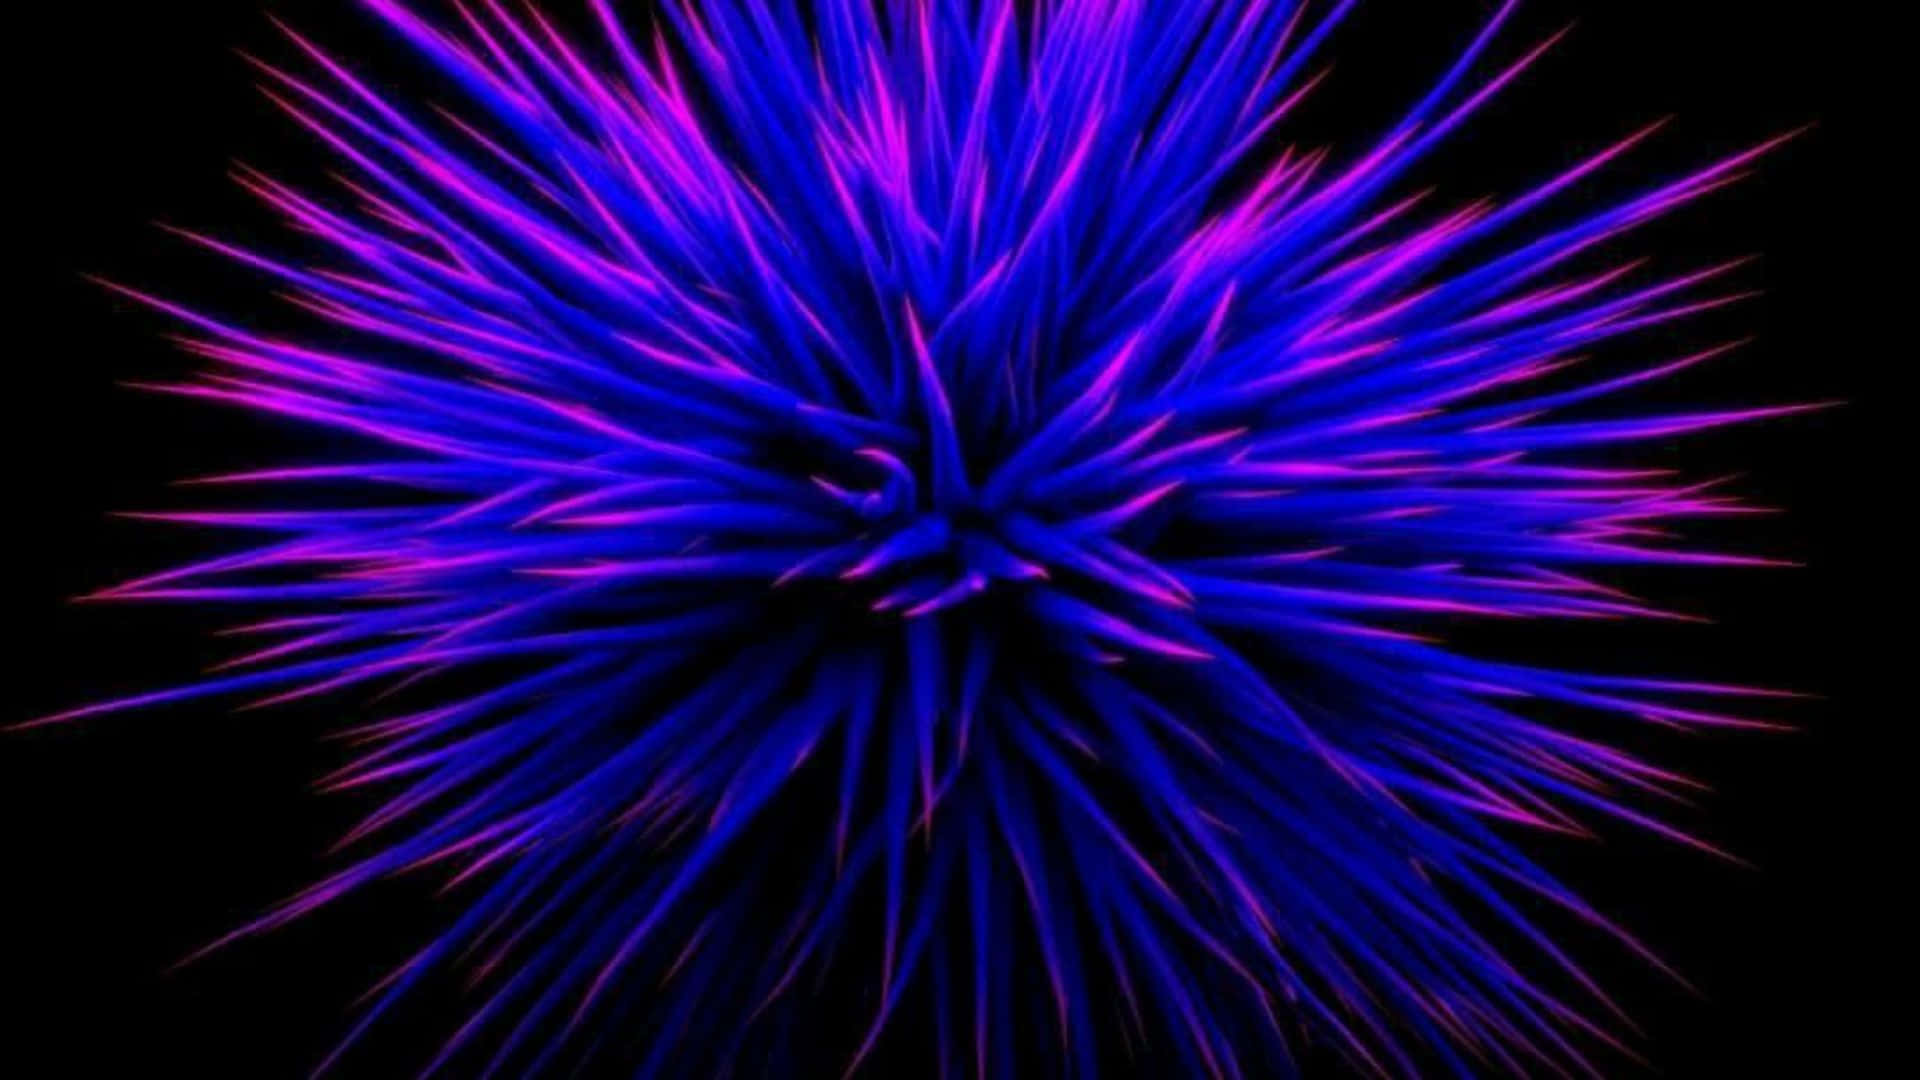 A Purple And Blue Spiky Flower On A Black Background